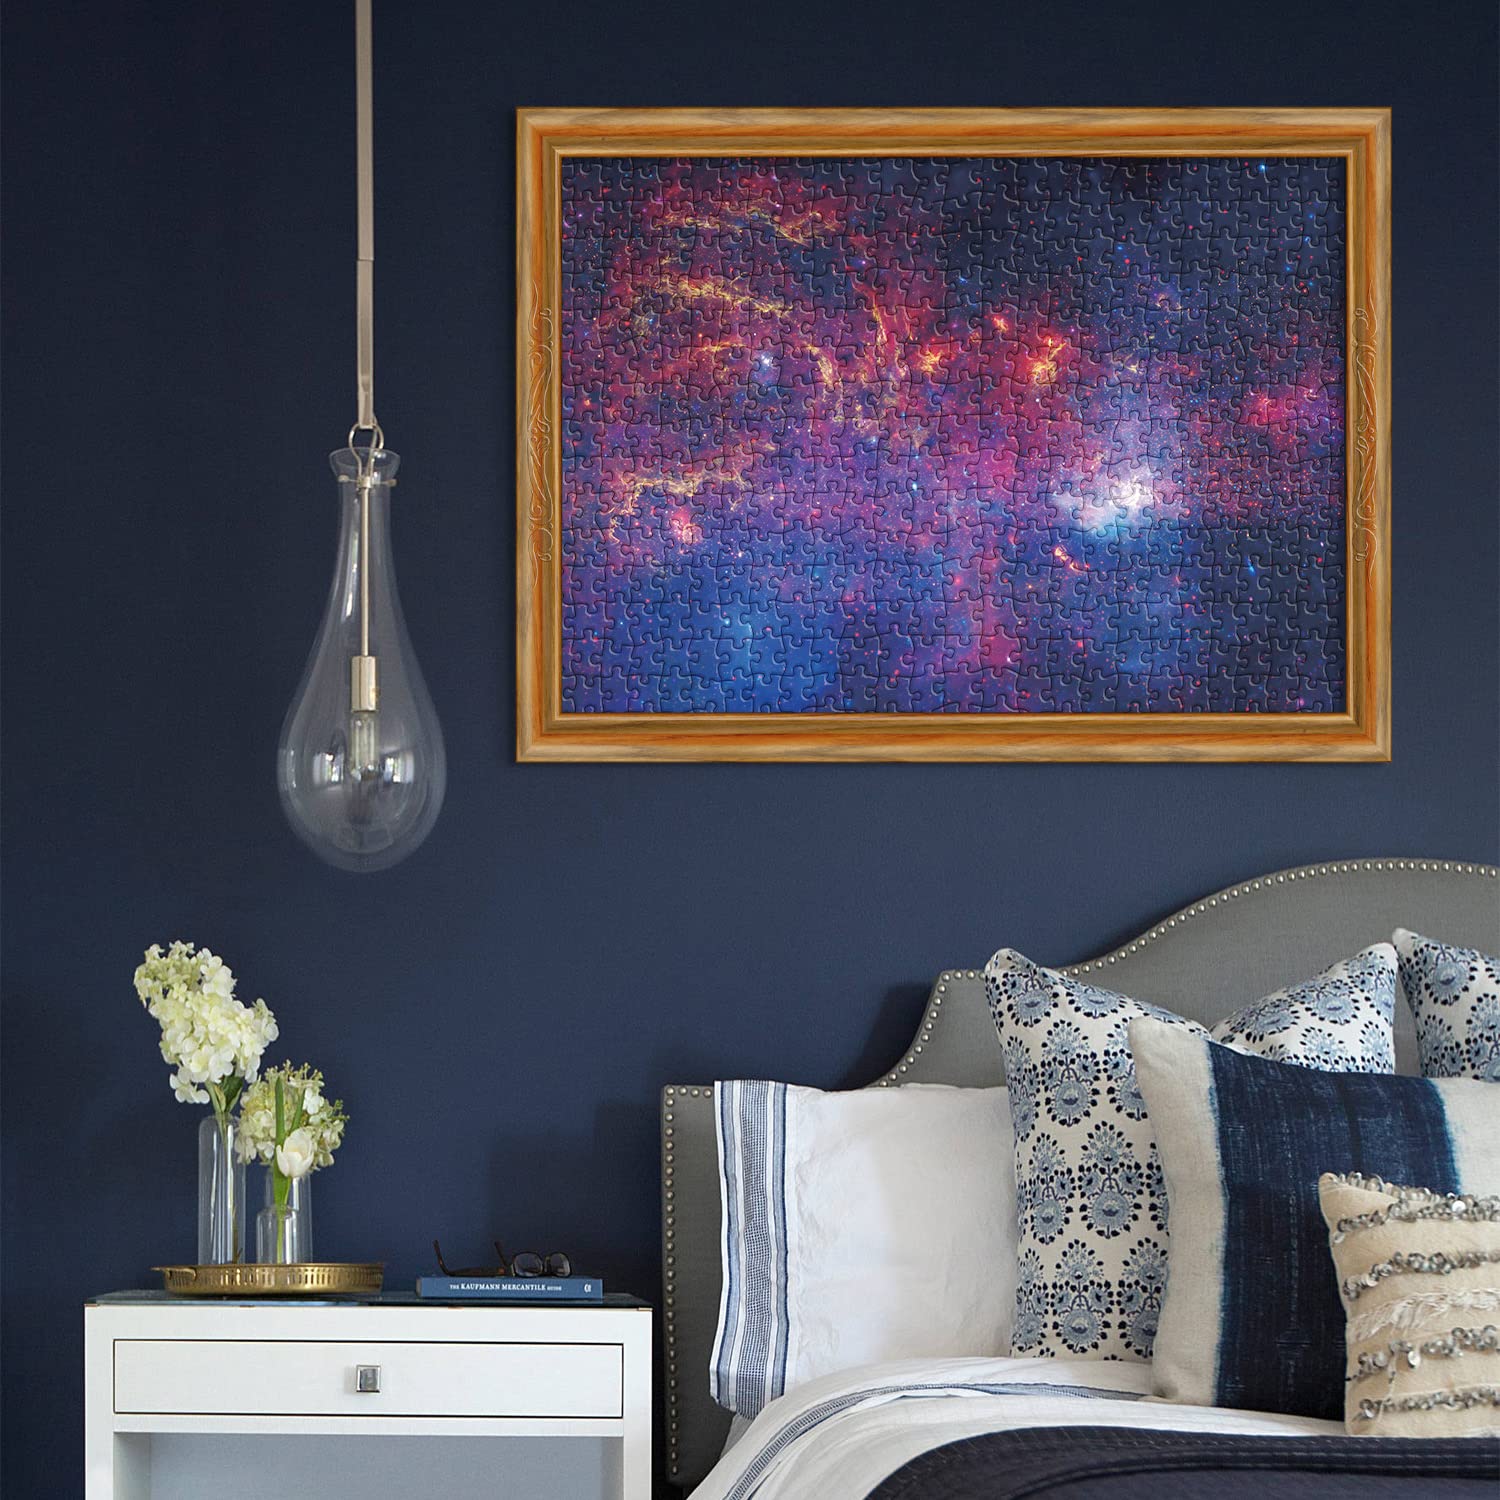 Galactic Centre Space Jigsaw Puzzle 1000 Pieces